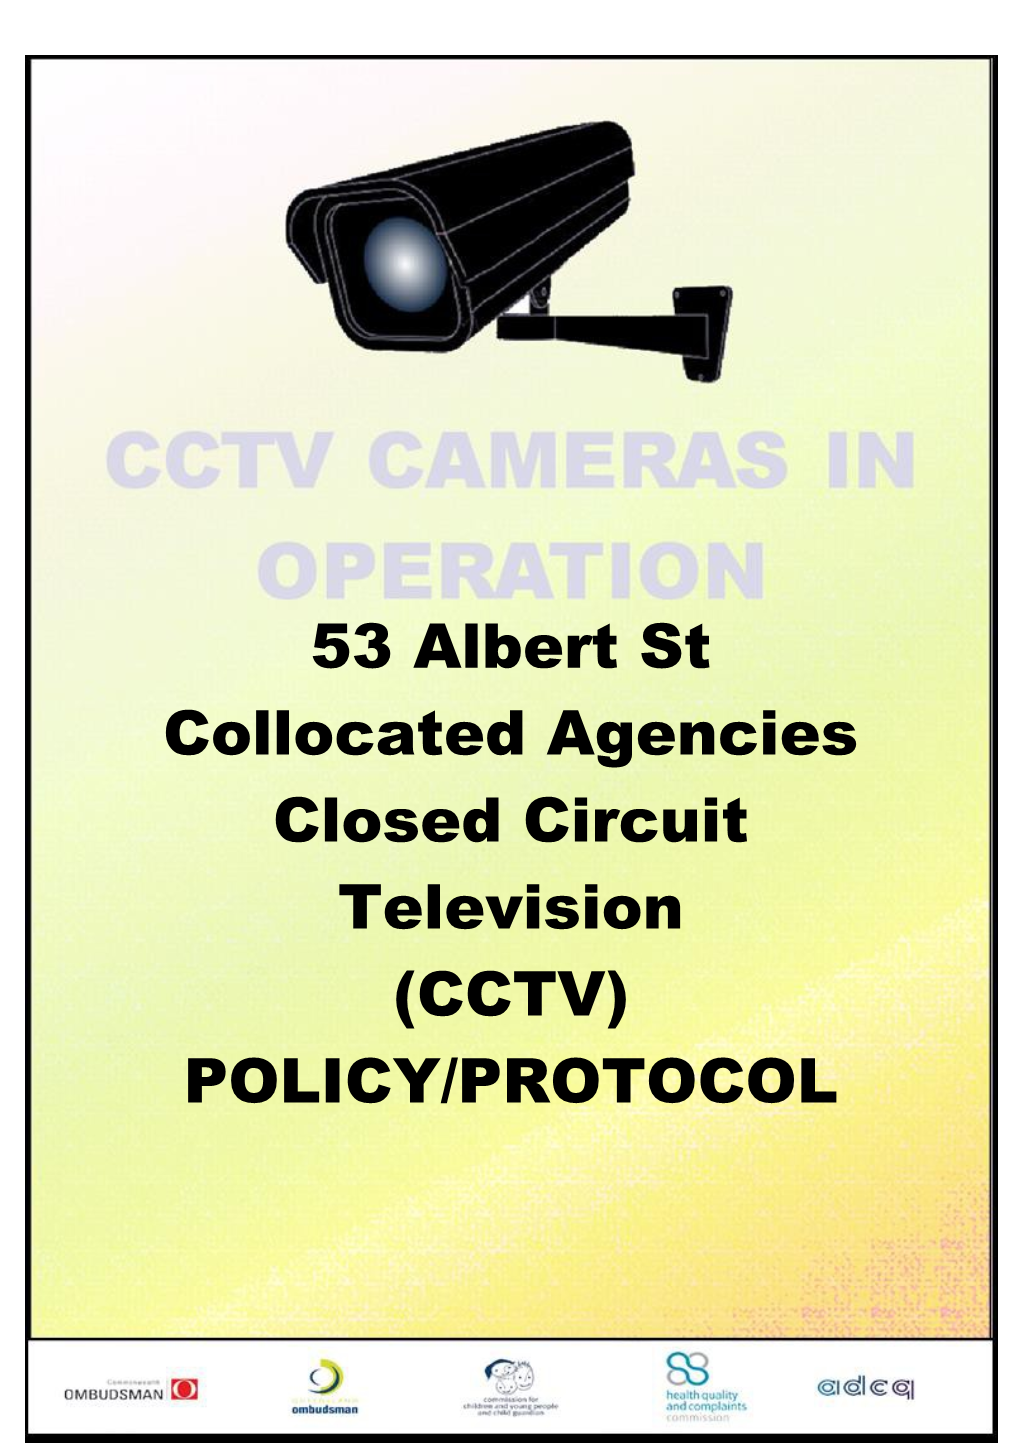 53 Albert St Co-Located Agencies CCTV Policy/Protocol